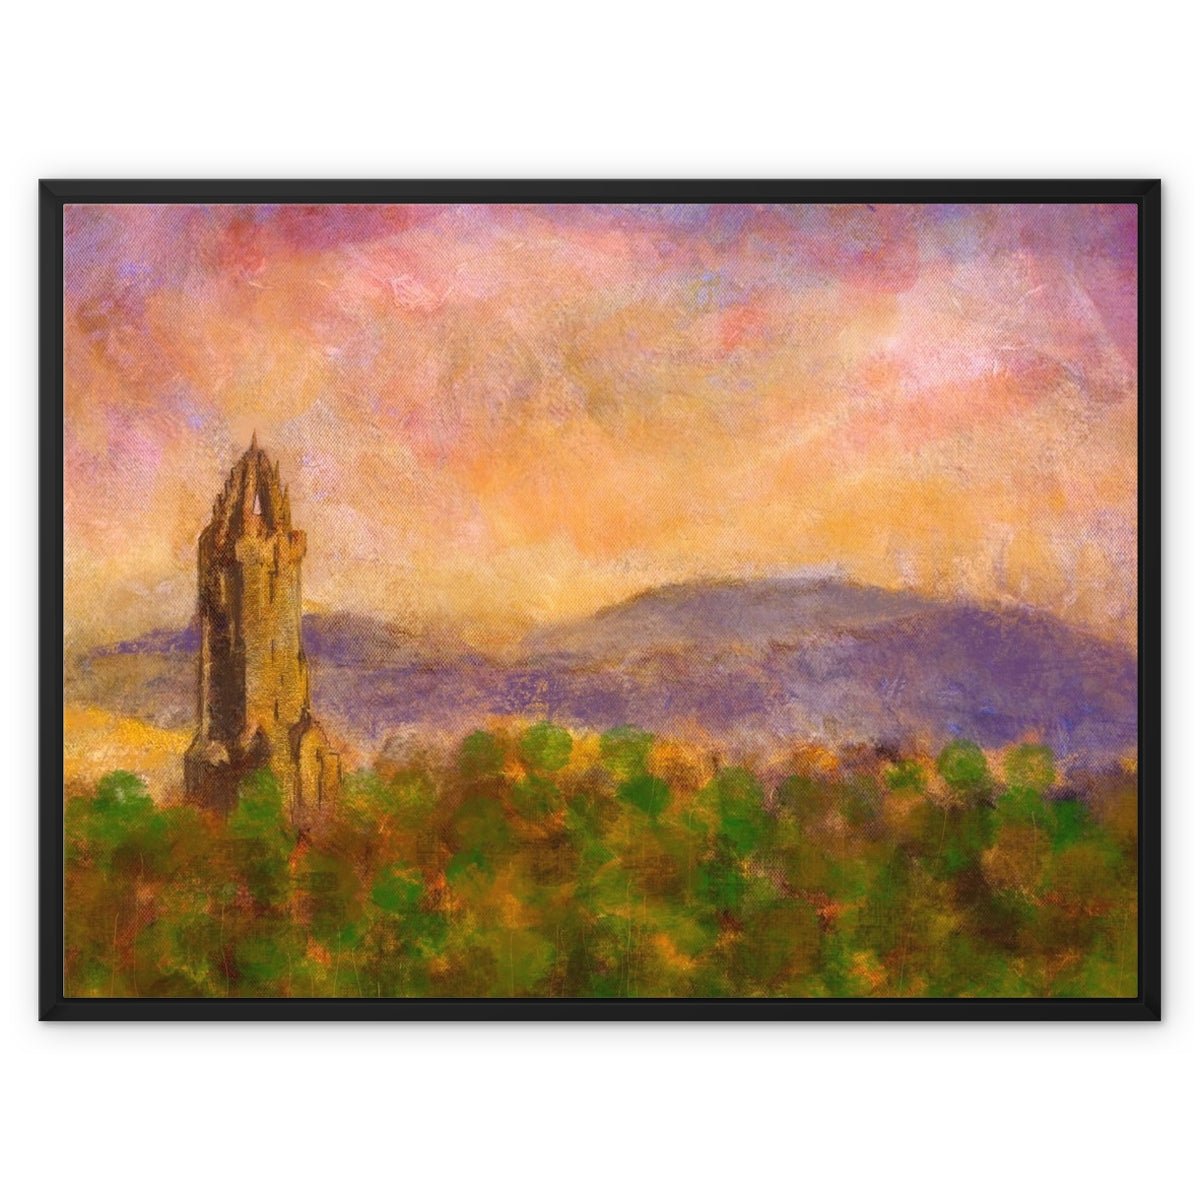 Wallace Monument Dusk Painting | Framed Canvas From Scotland-Floating Framed Canvas Prints-Historic & Iconic Scotland Art Gallery-32"x24"-Paintings, Prints, Homeware, Art Gifts From Scotland By Scottish Artist Kevin Hunter